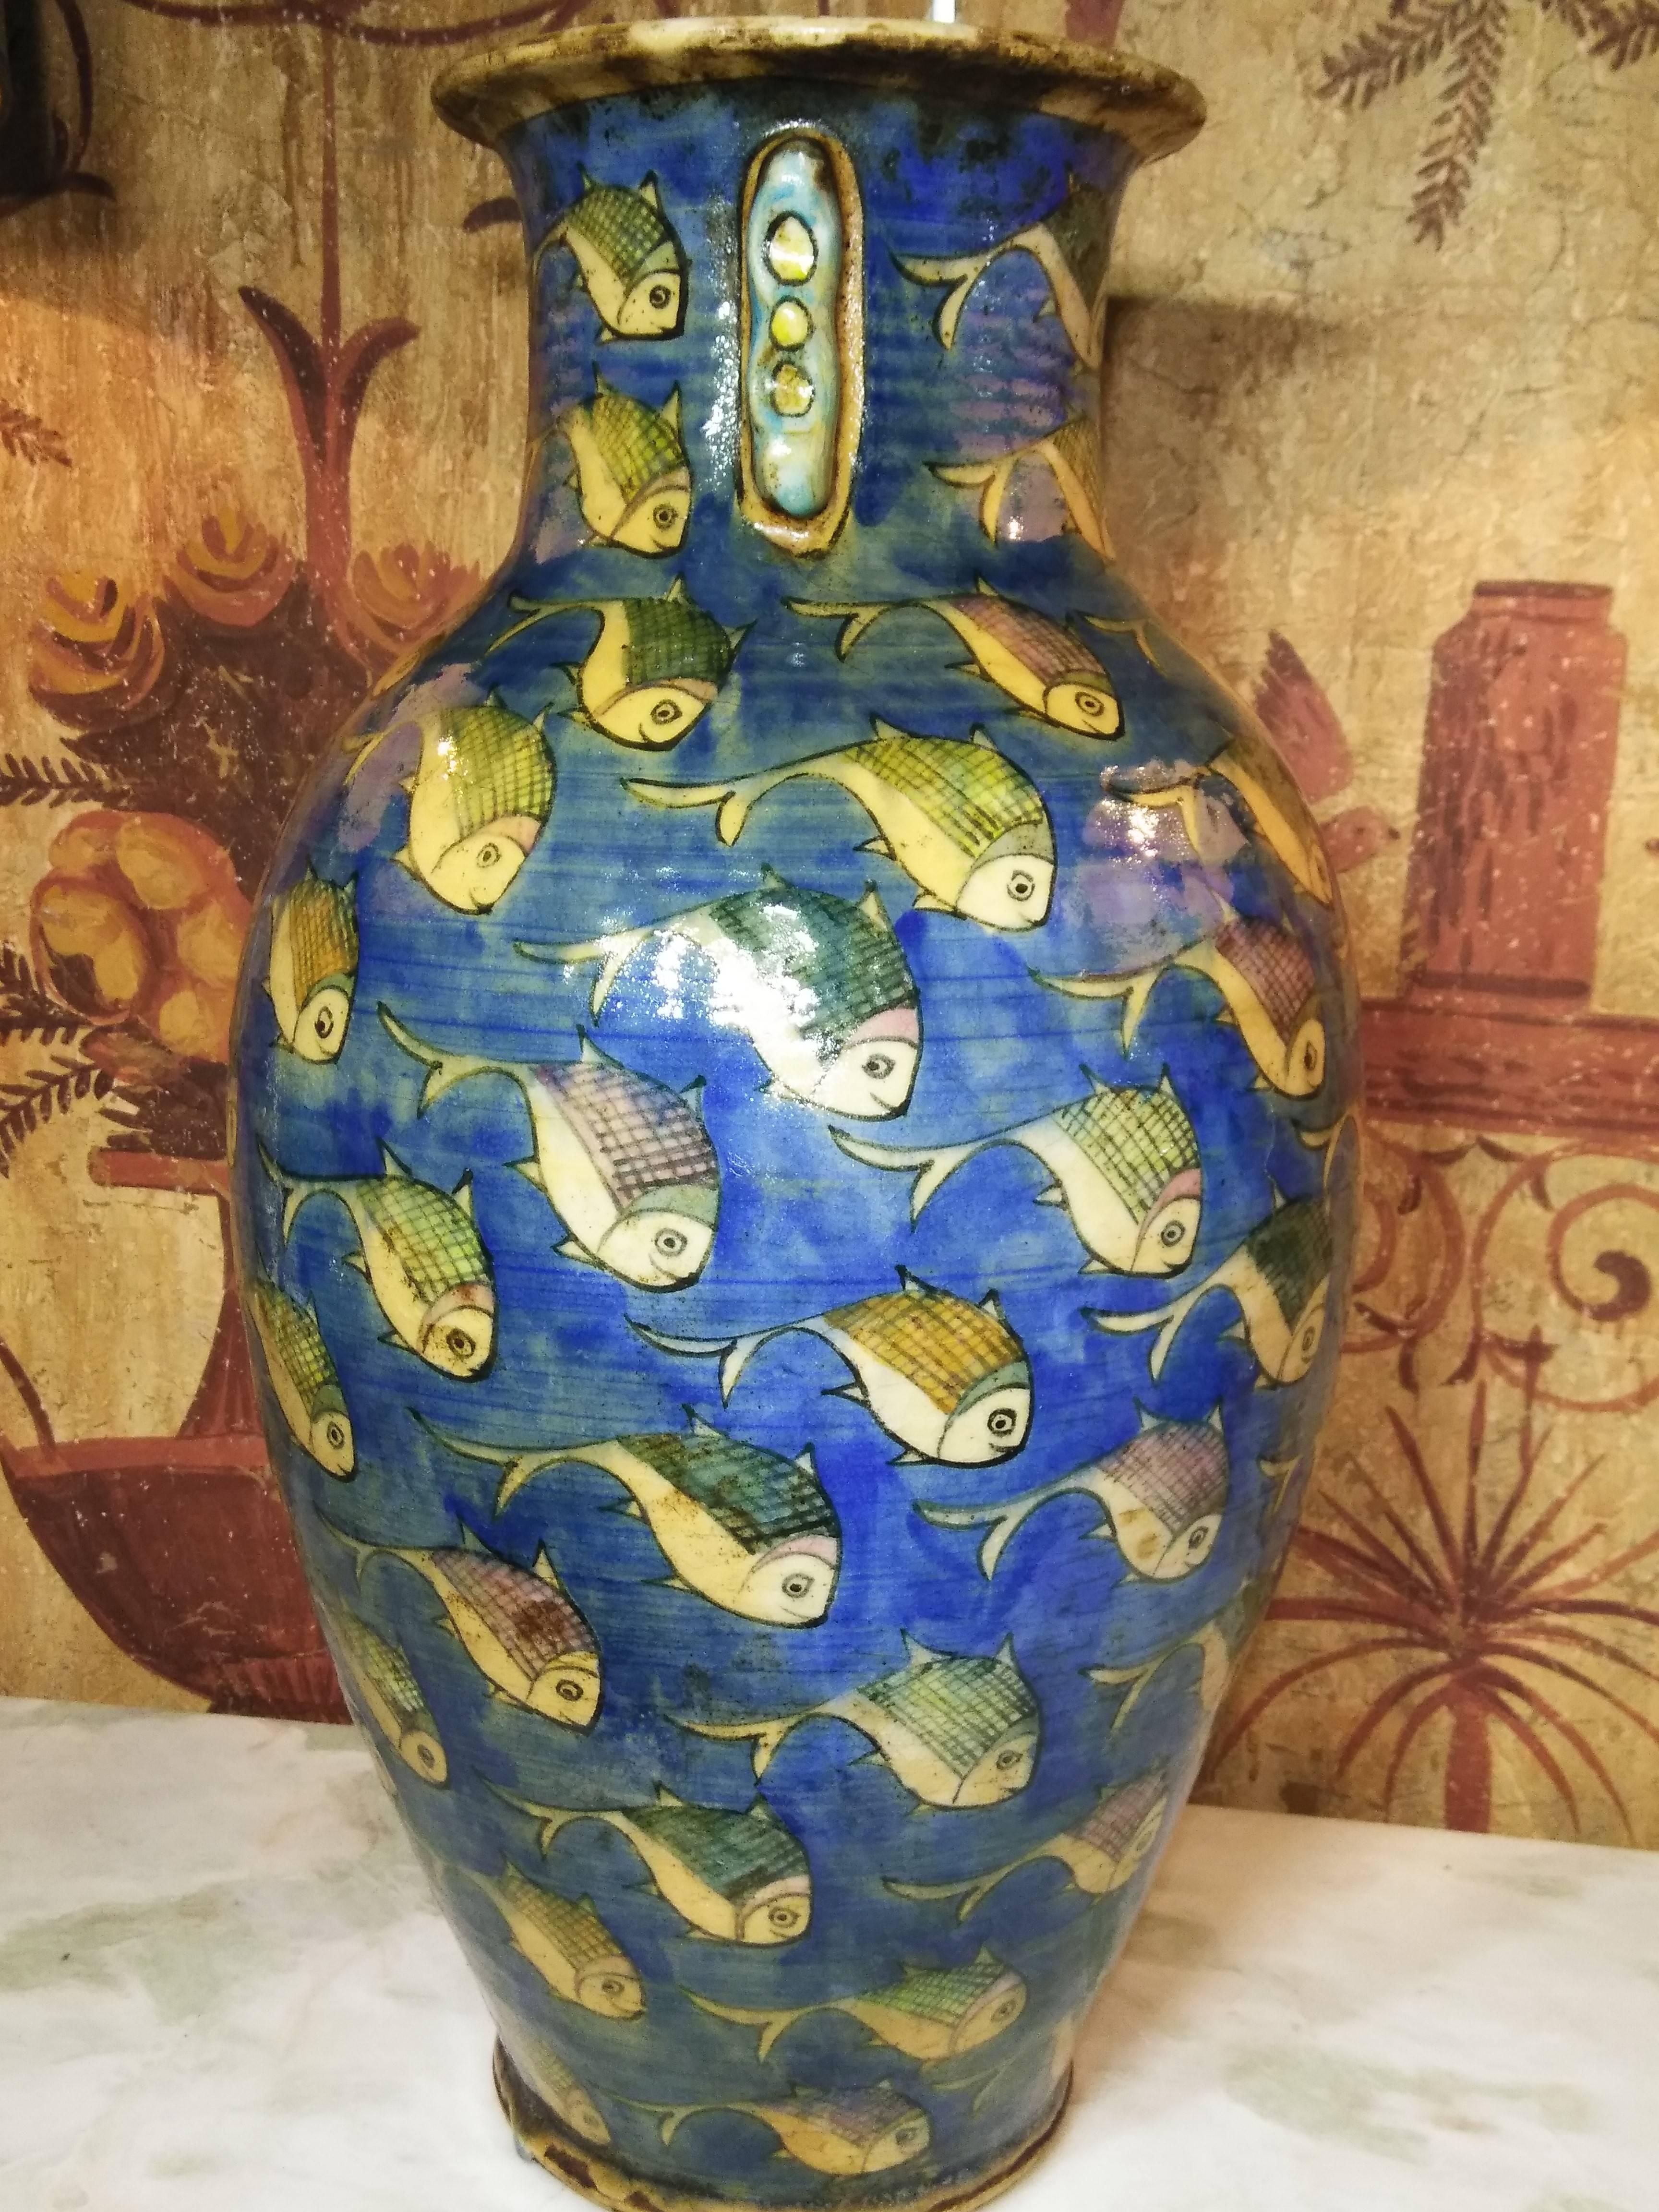 Beautiful vintage blue Persian ceramic vase hand-painted and glazed with colorful fish motif surrounding it, great decorative piece of art for any room.